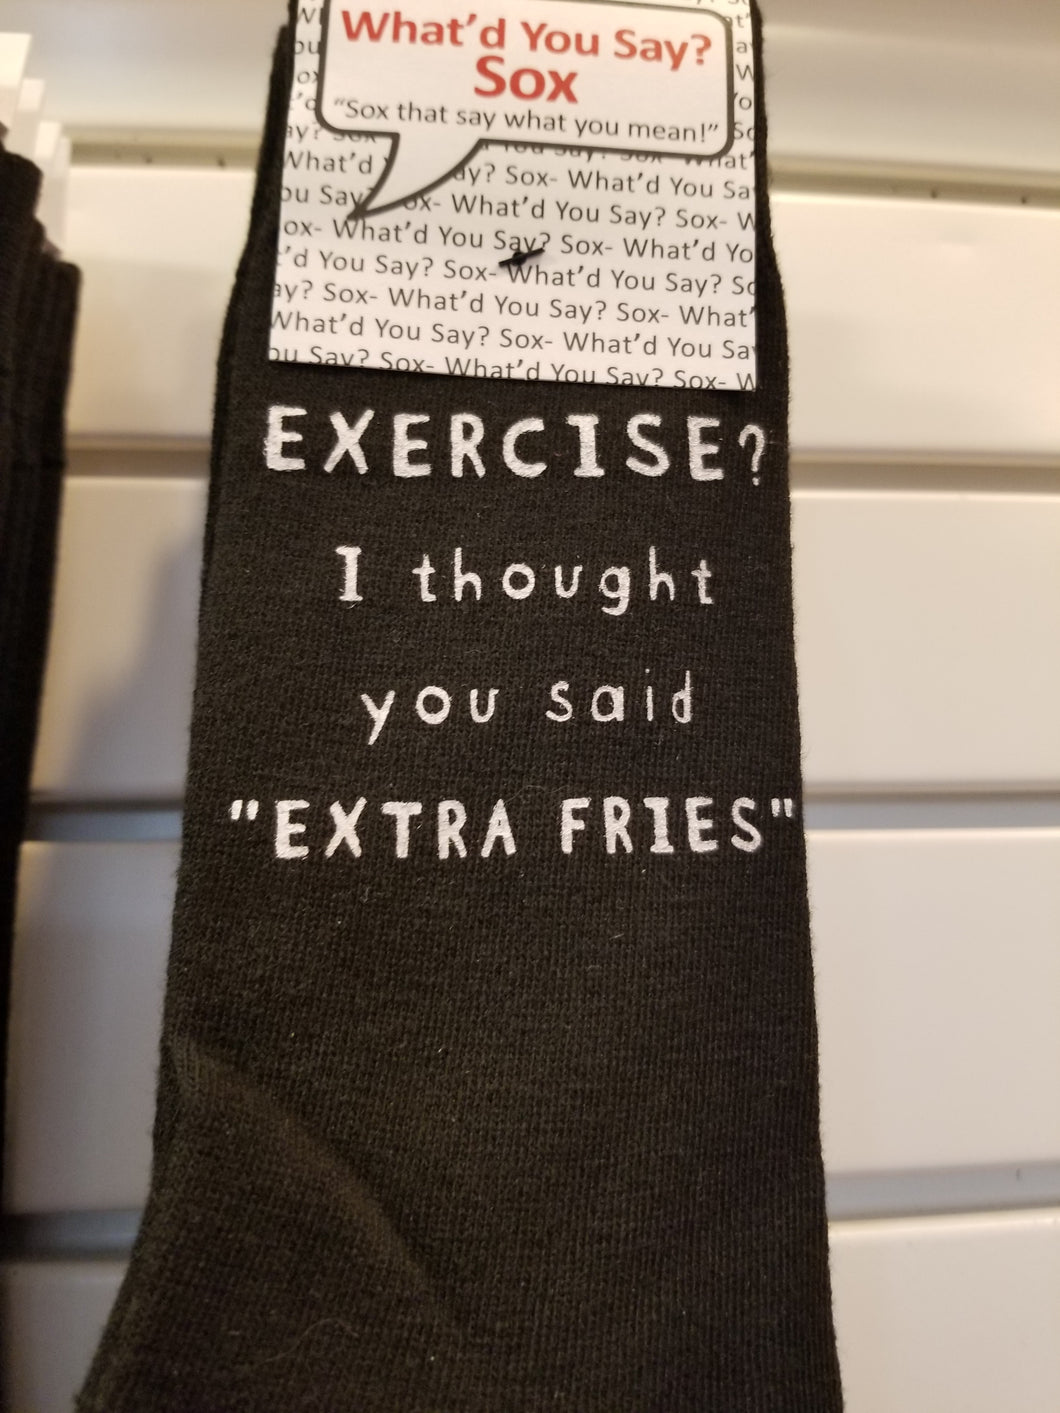 EXERCISE? I thought you said - Sox